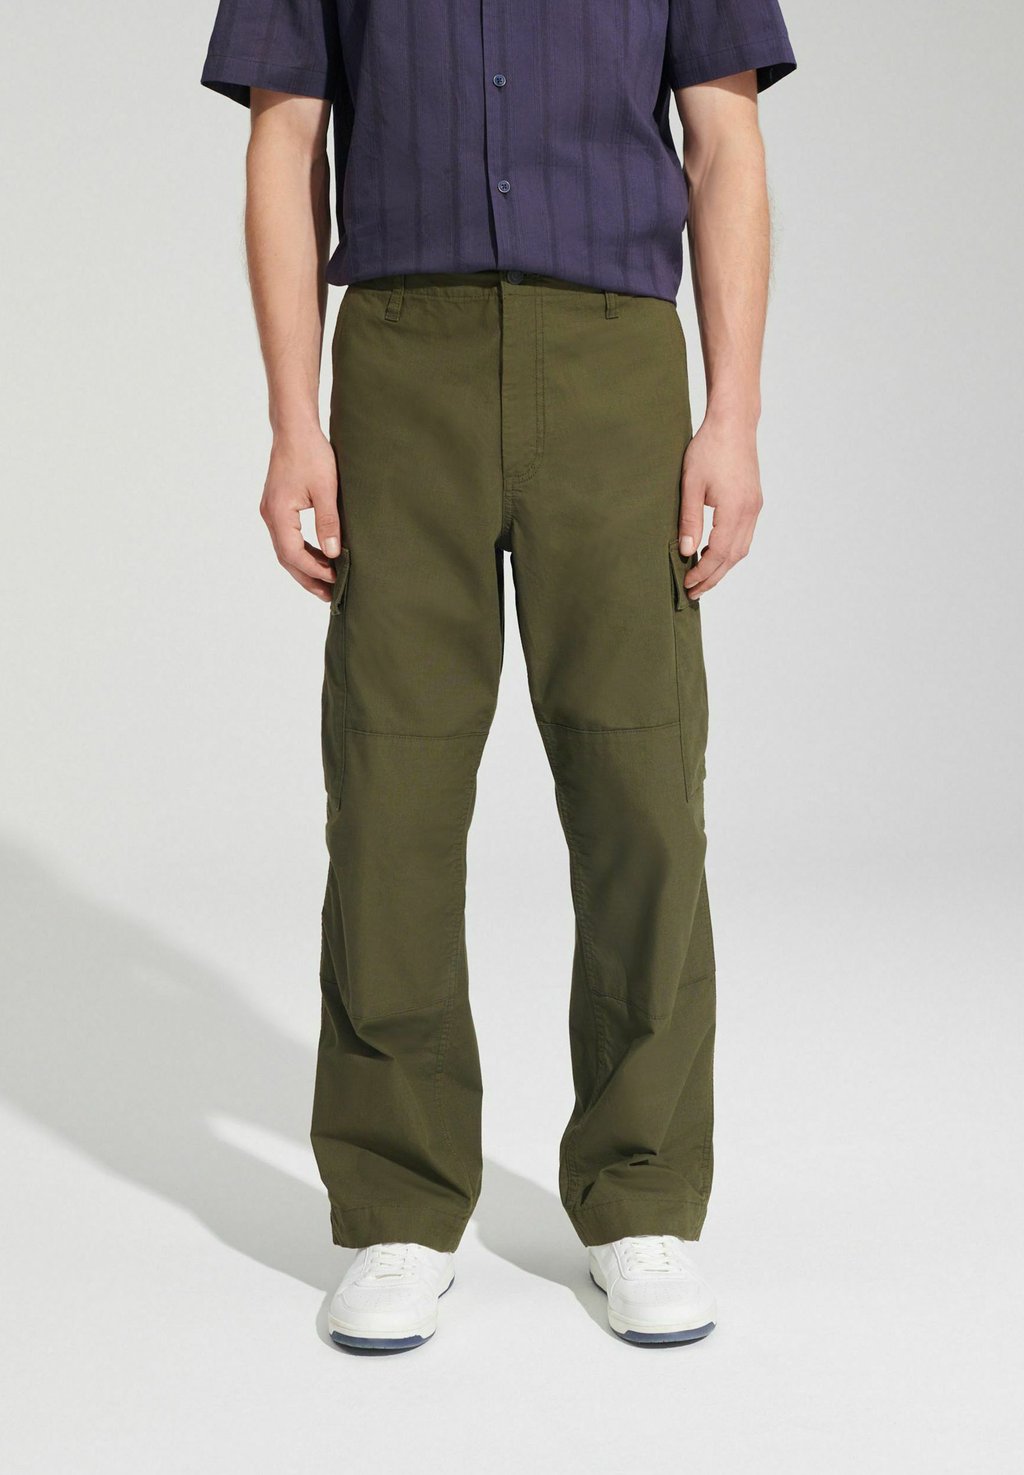 Брюки-карго Ripstop Cargo Trousers Relaxed Fit Next, цвет khaki green